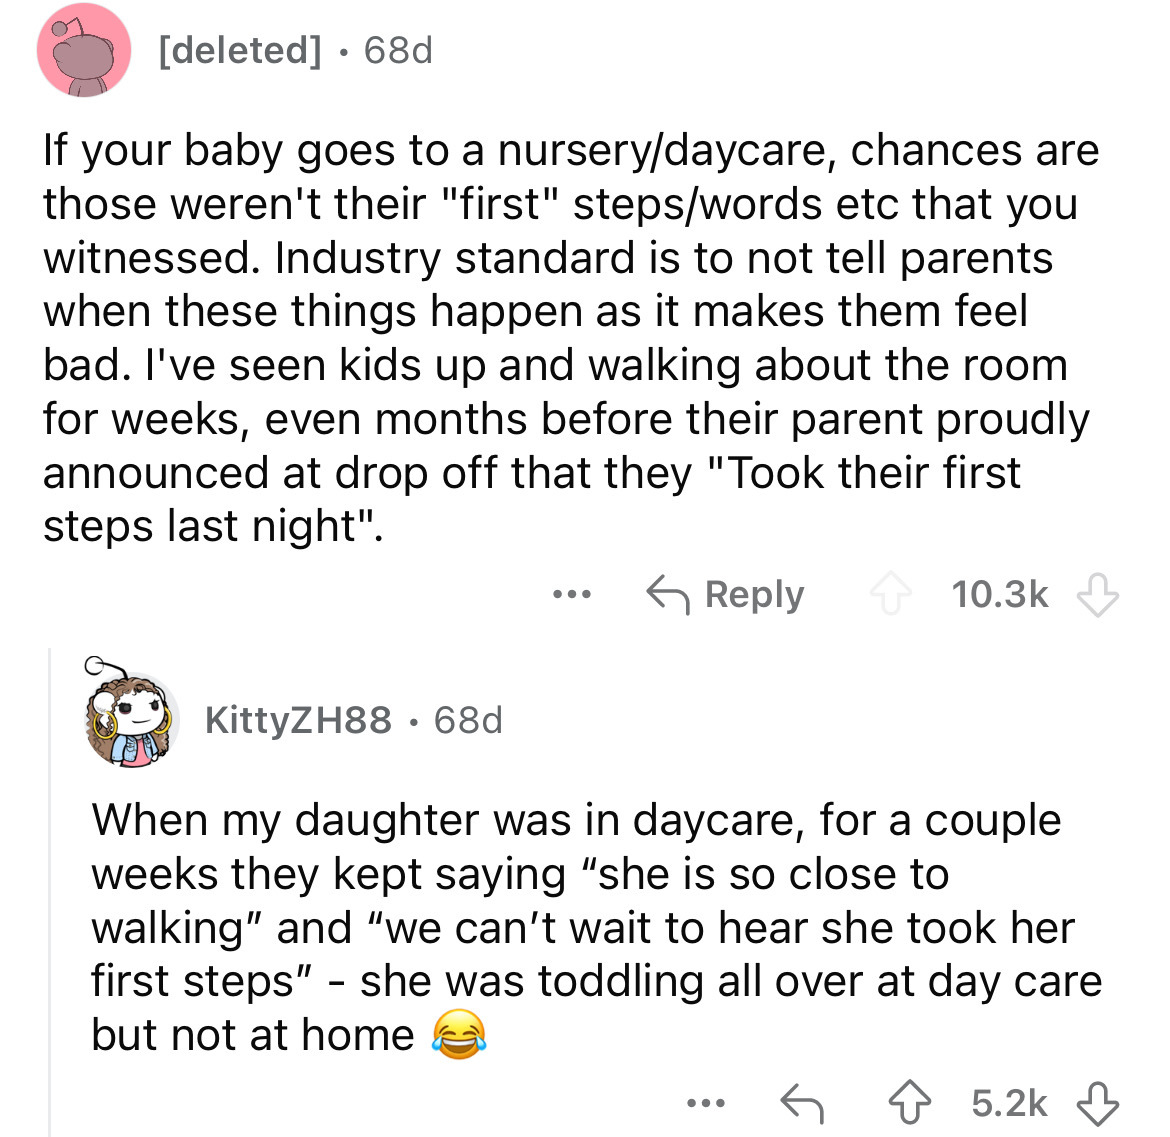 screenshot - deleted 68d If your baby goes to a nurserydaycare, chances are those weren't their "first" stepswords etc that you witnessed. Industry standard is to not tell parents when these things happen as it makes them feel bad. I've seen kids up and w